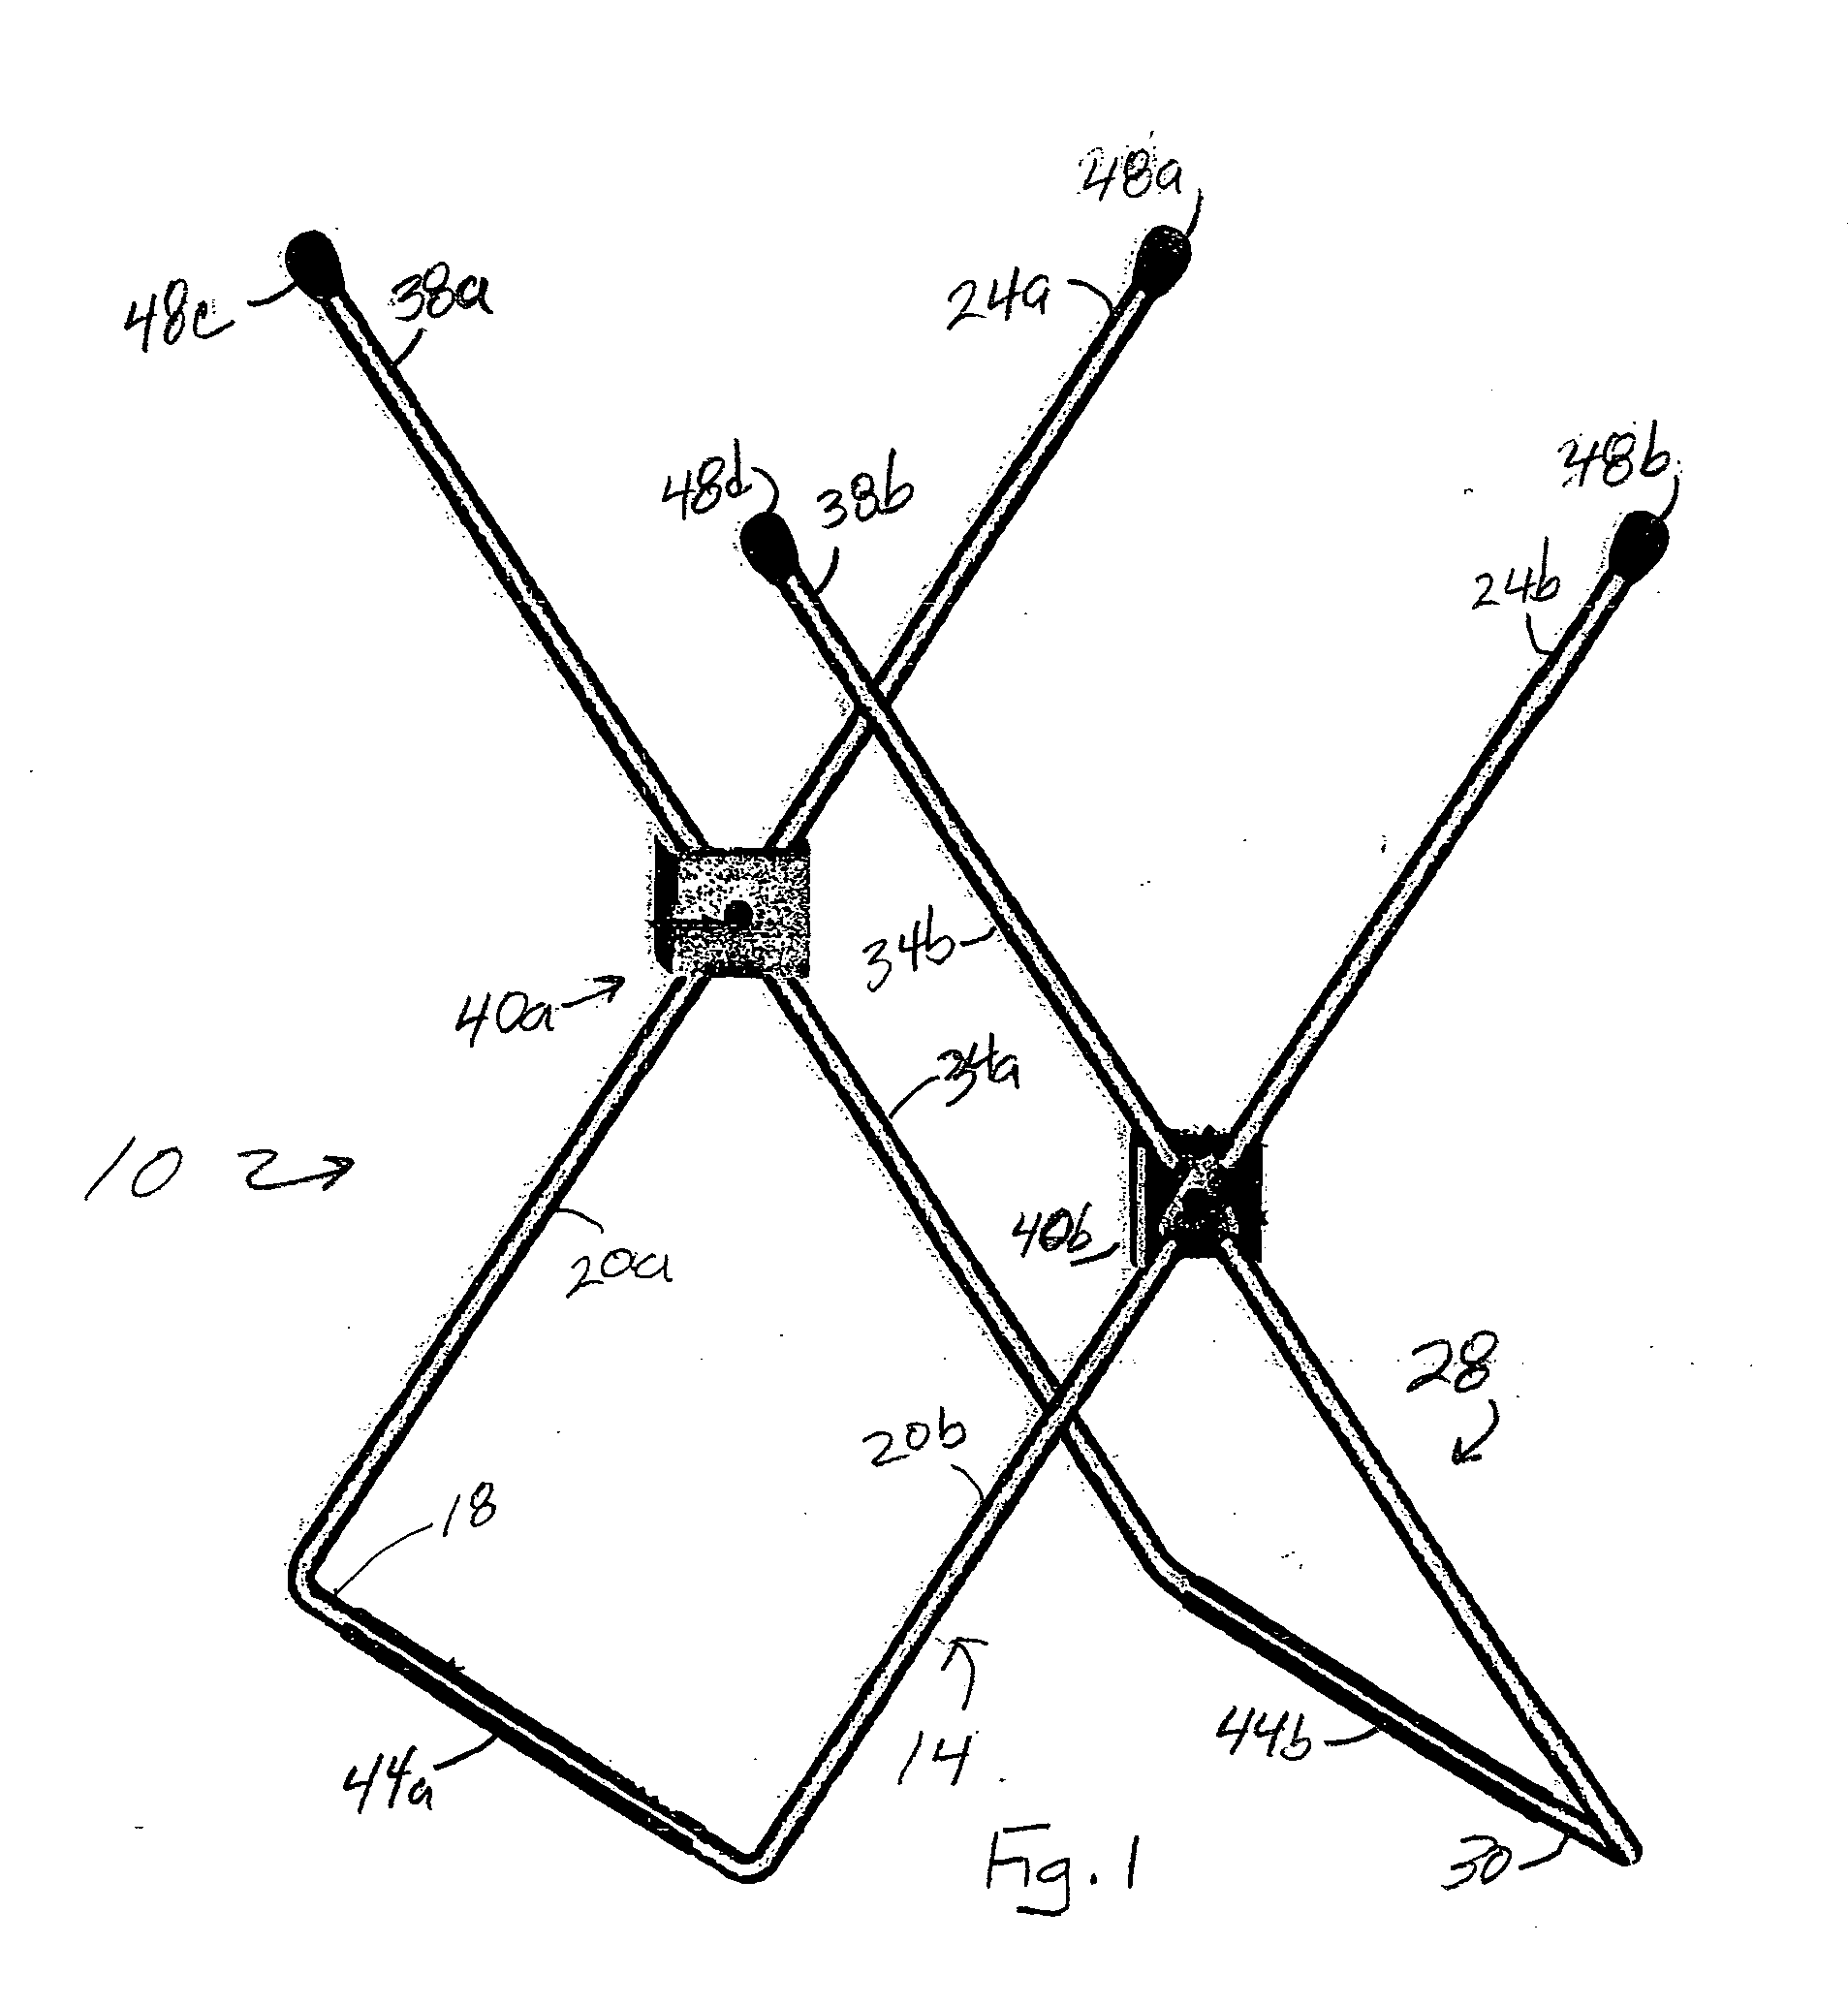 System and method for stabilizing a refrigerator storage bag to facilitate loading the bag with contents